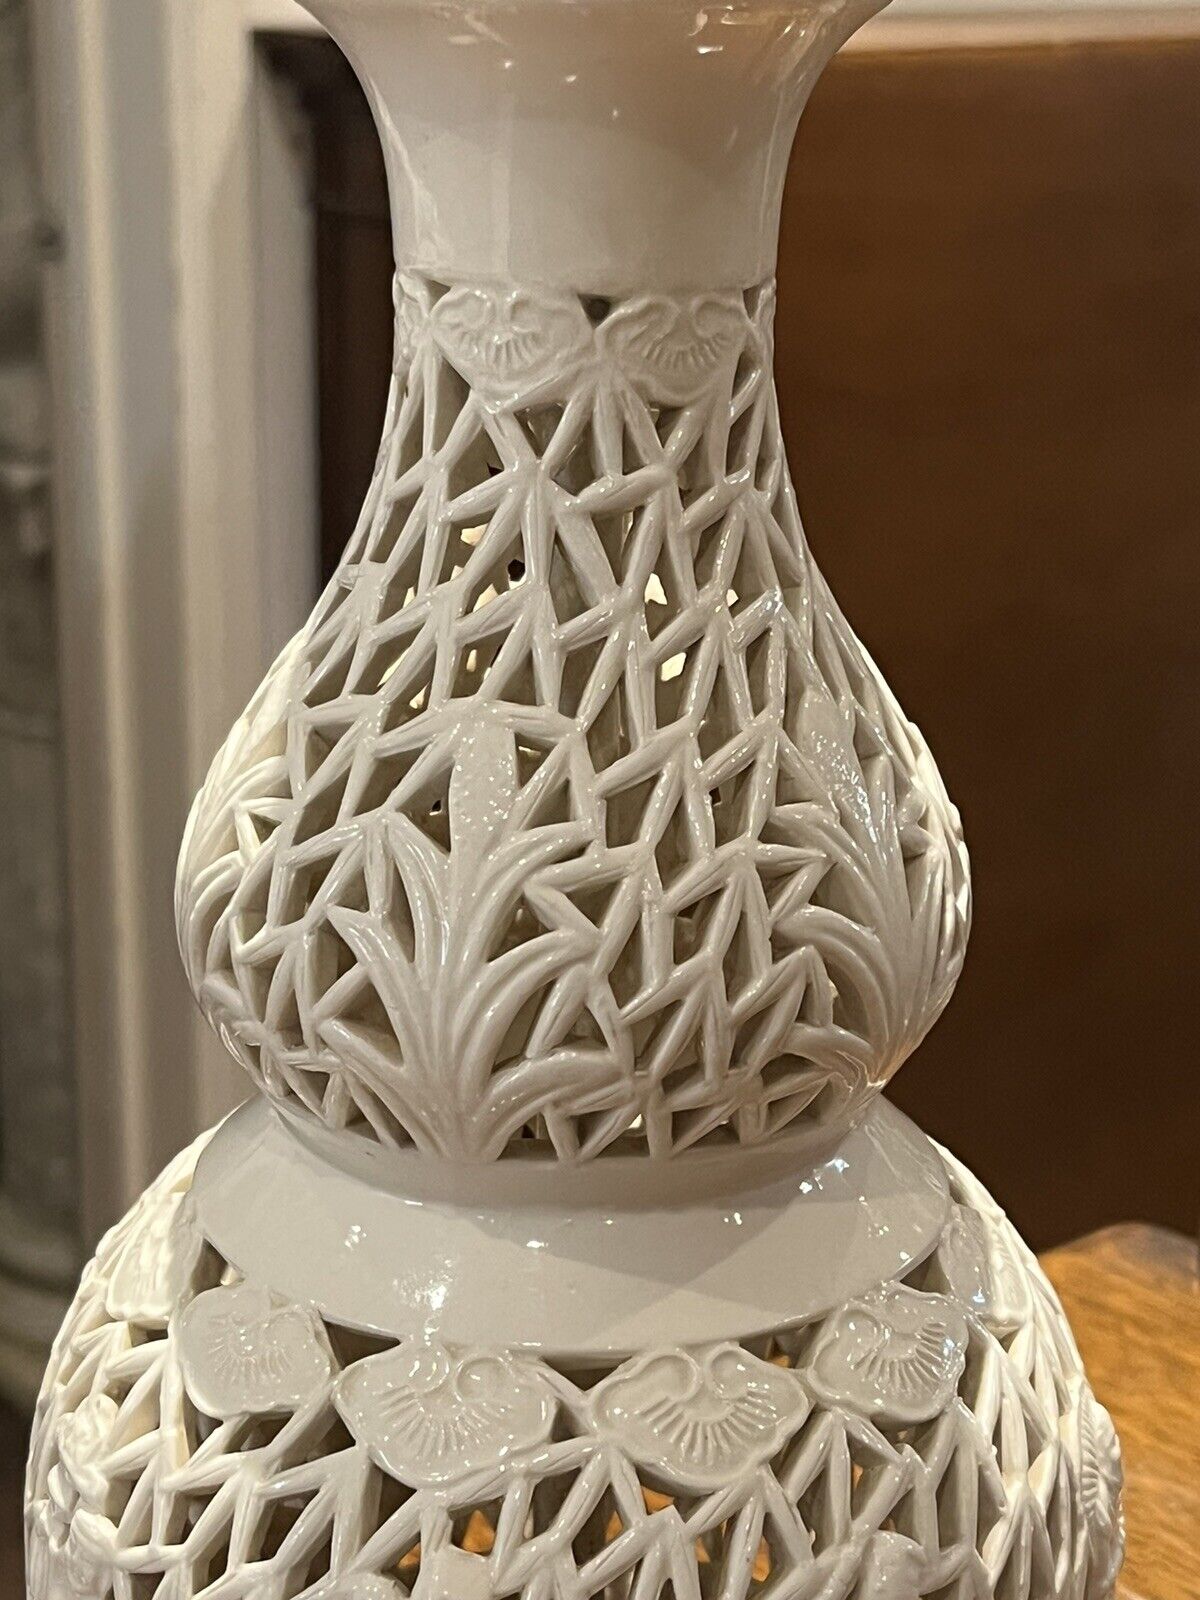 Chinese Vase That Has Been Converted To A Lamp